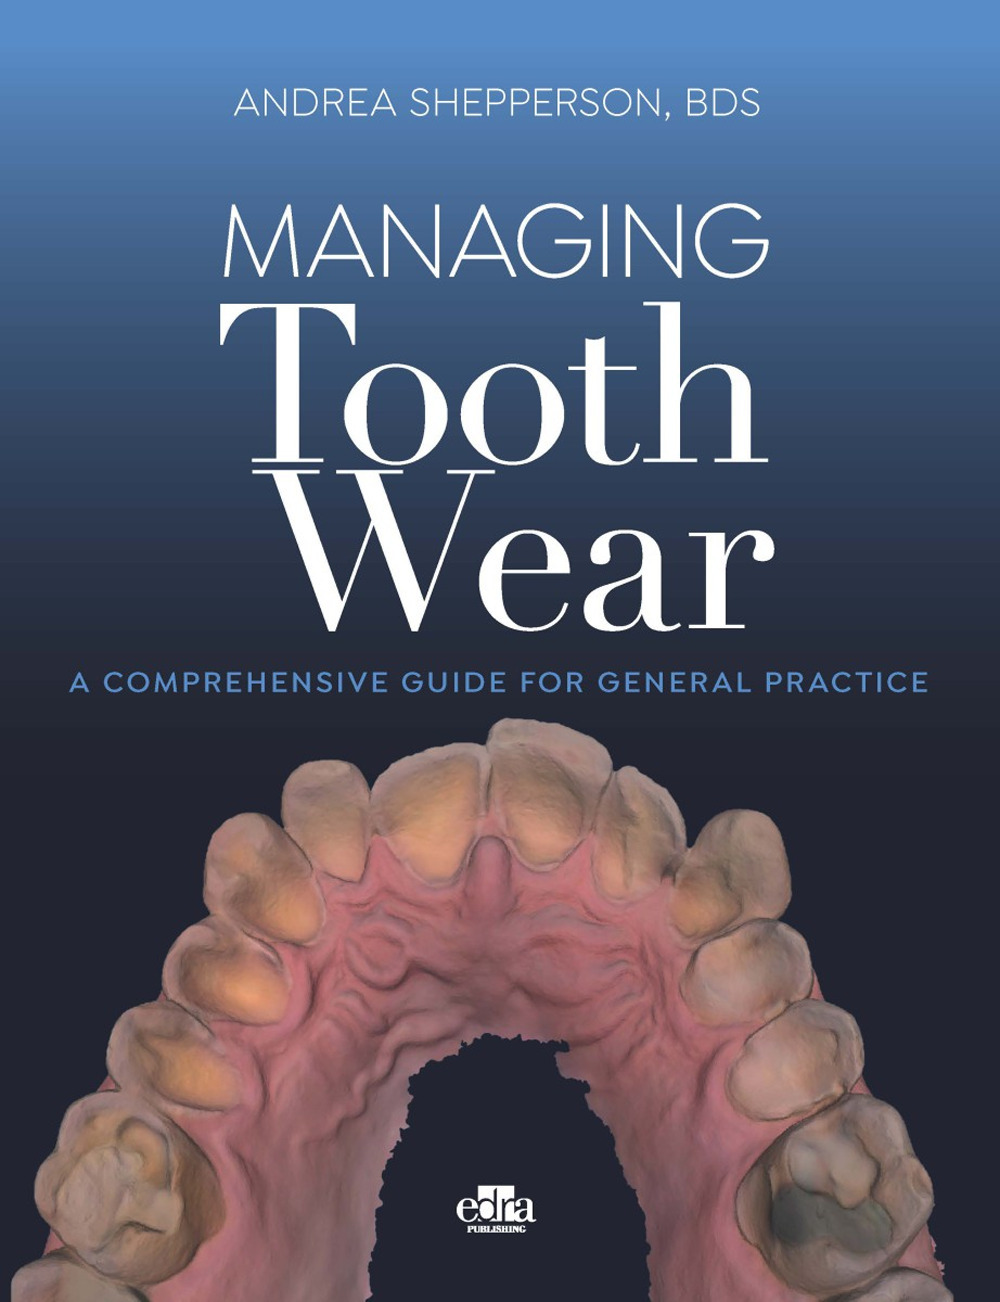 Managing tooth Wear. A comprehensive guide for general practice